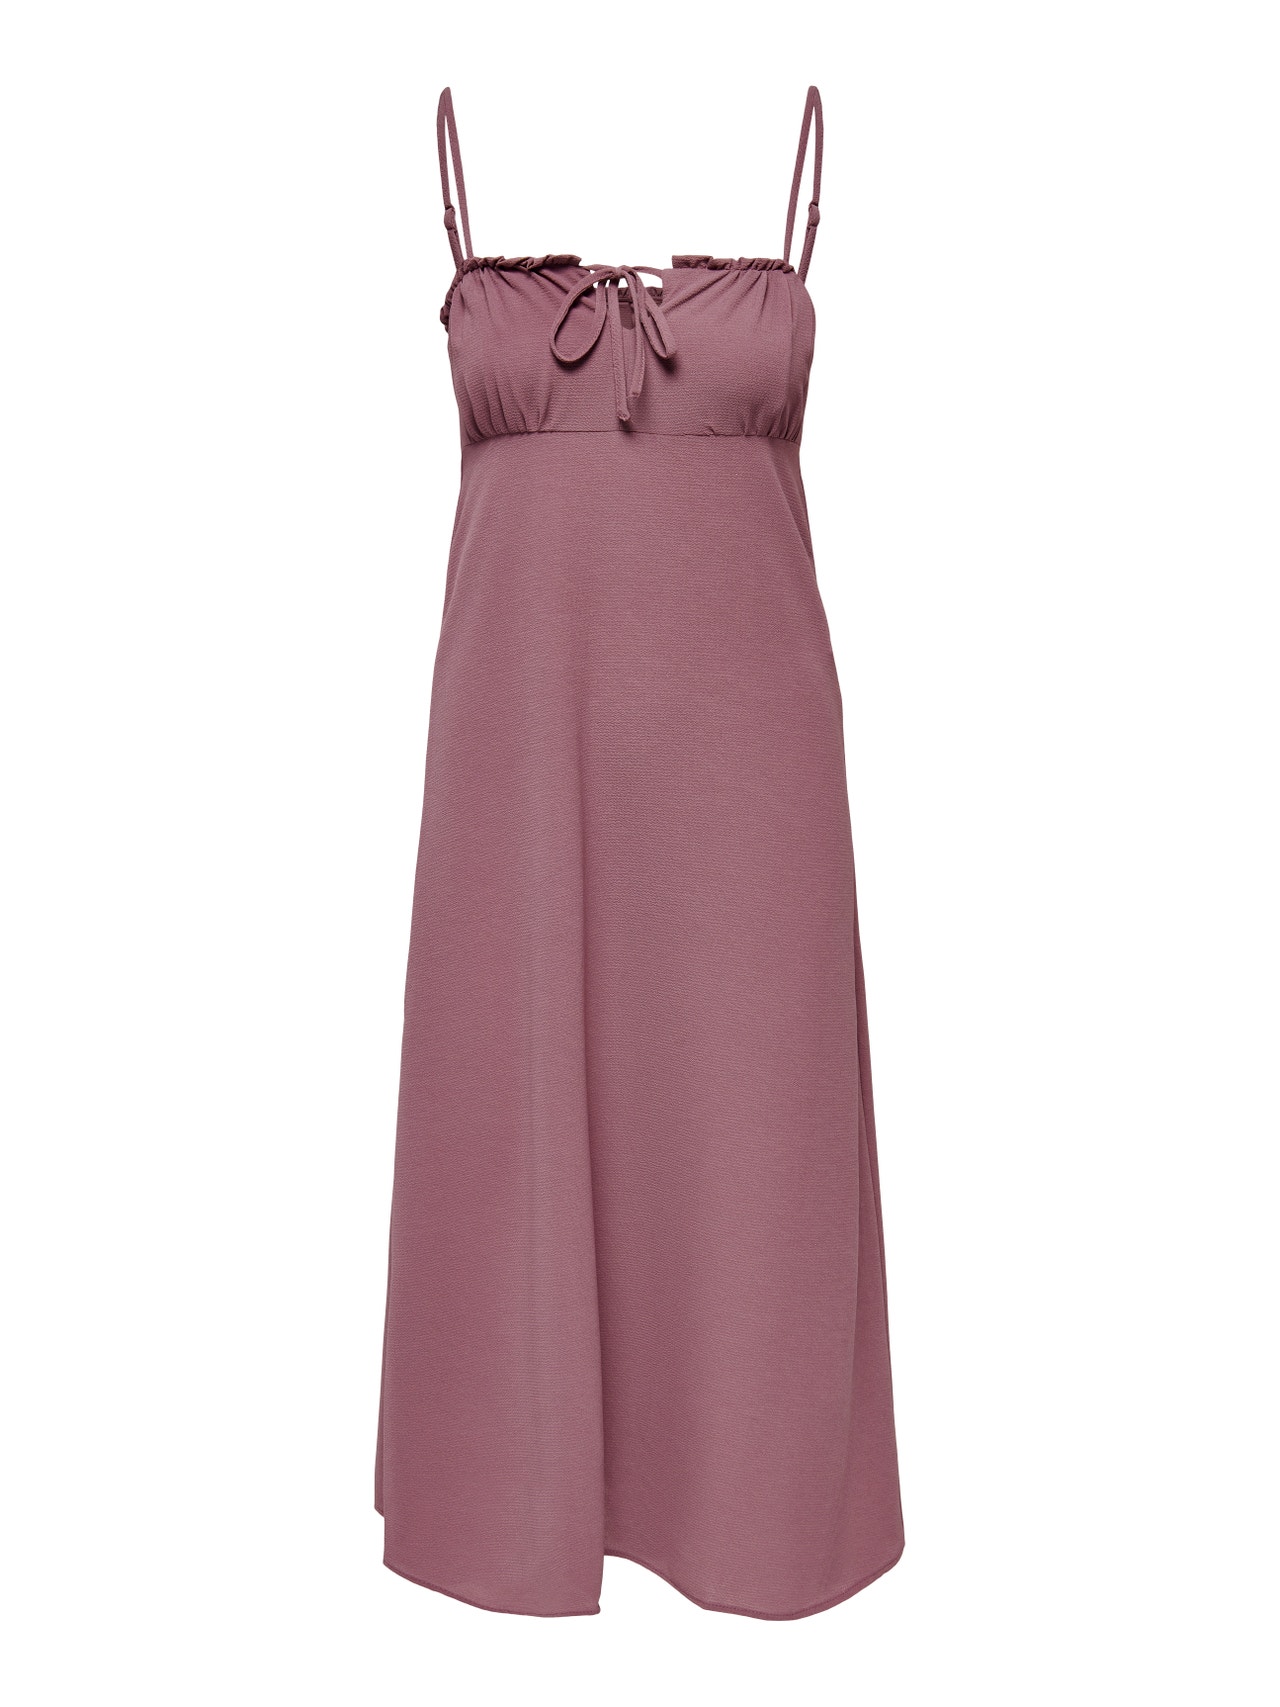 ONLY Solid colored strap Midi dress -Rose Brown - 15264454